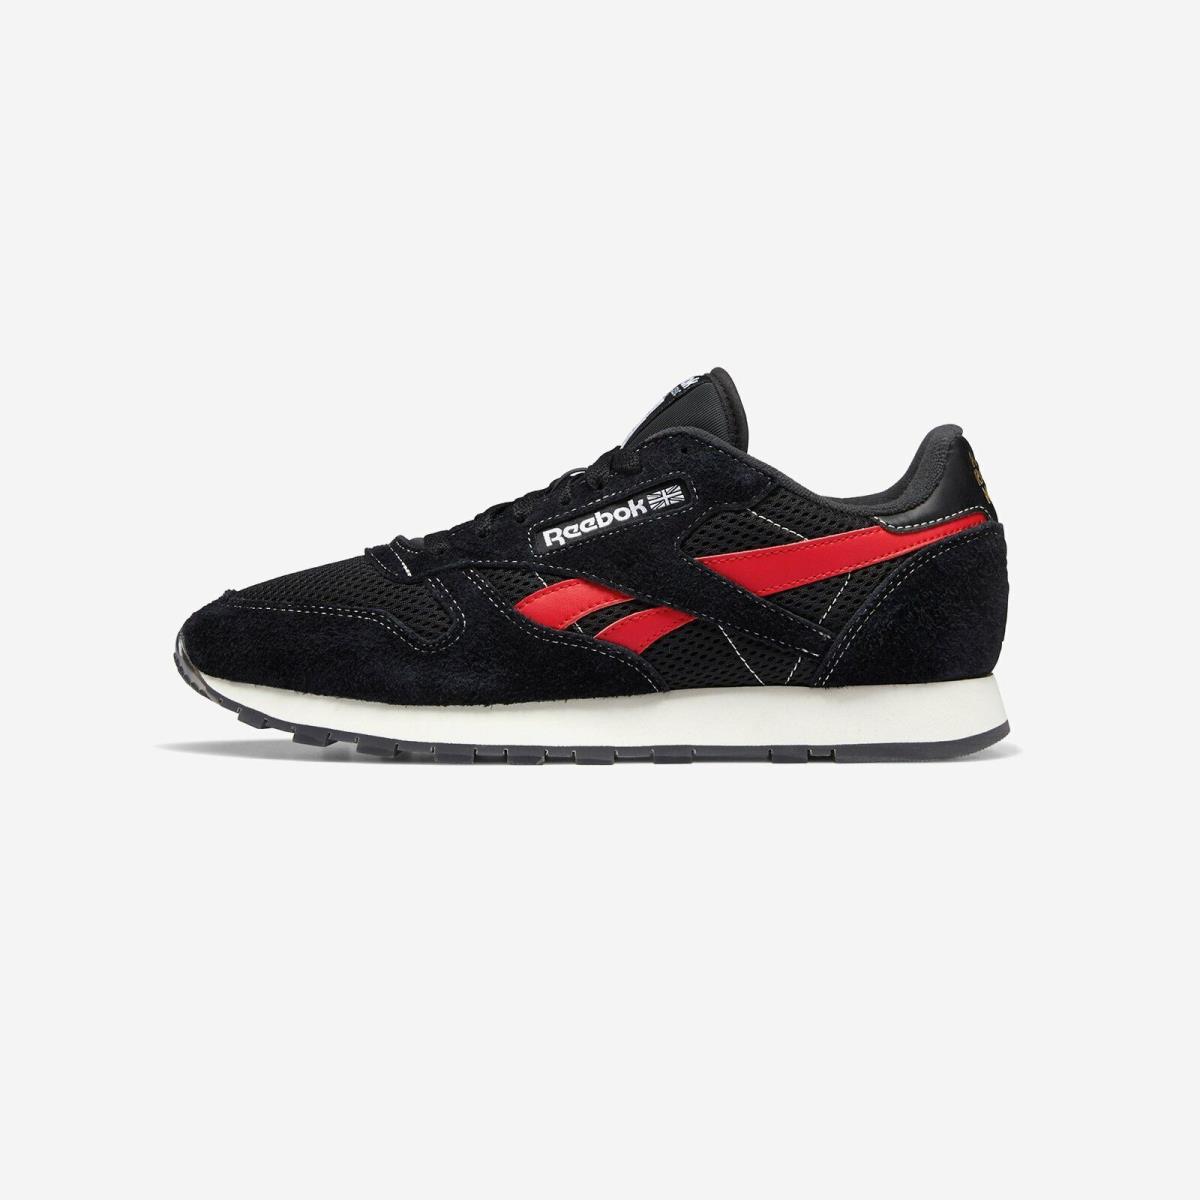 it's beautiful caravan Pamphlet Mens Reebok CL Classic Leather Gy0707 Black Red Green Shoes | 000316224176  - Reebok shoes - Black | SporTipTop